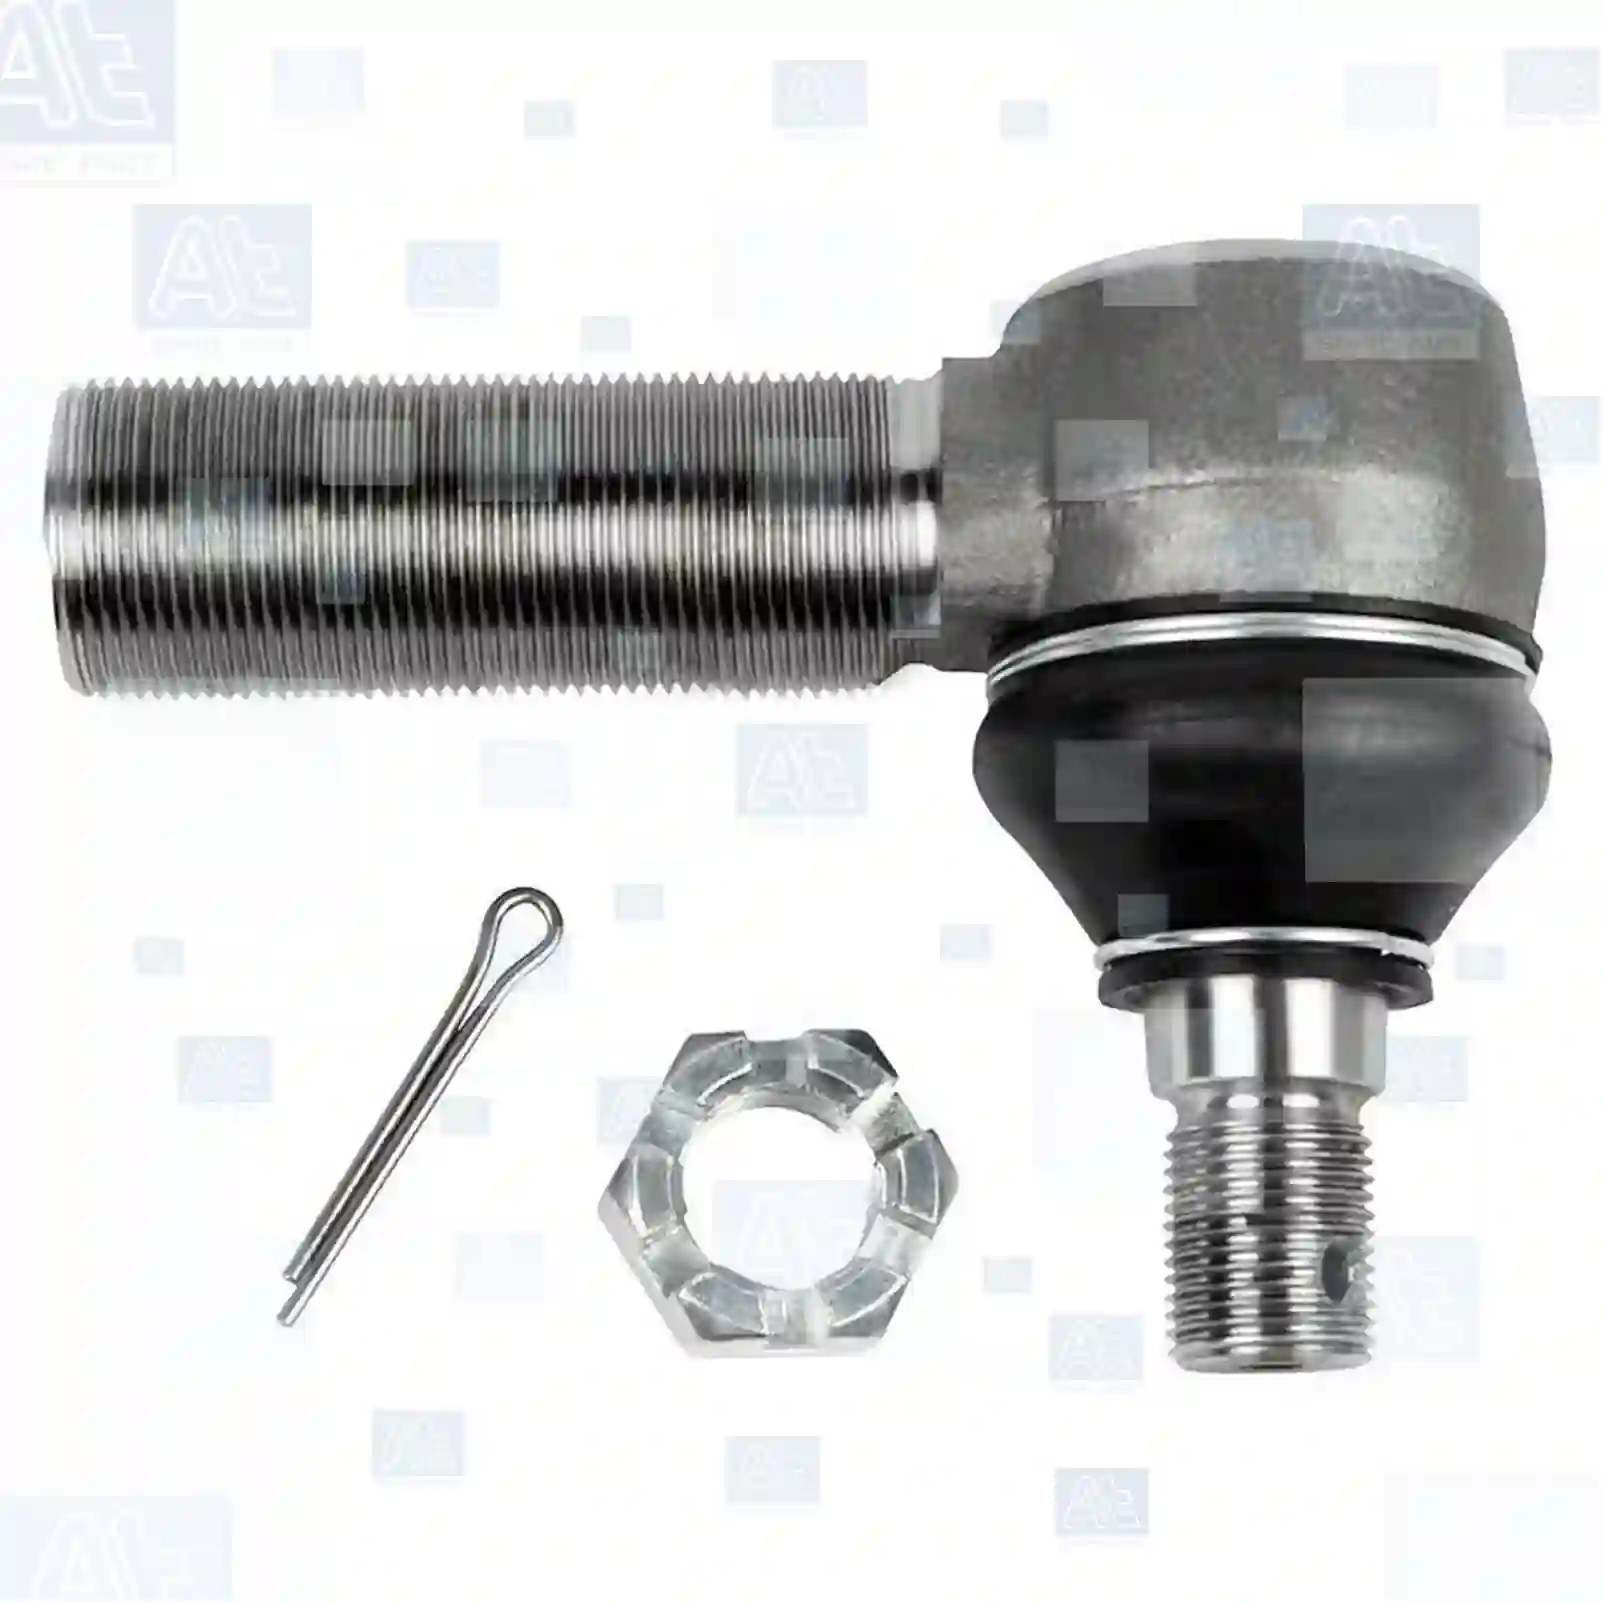 Ball joint, right hand thread, at no 77705369, oem no: 0100197, 0110197, 0607451, 0607453, 100197, 110197, 1228114, 1326864, 1373135, 607451, 607453, ACU9242, 387025960151, 004833825, 02966321, 02966635, 04833825, 04833825, 08193645, 08558533, 08582322, 2966321, 2966635, 42484886, 4833825, 4833825, 8193645, 8558533, 8582322, 81400004051, 81953016060, 81953016135, 81953016140, 81953016249, 81953016298, 81953016316, 81953016328, 81953016358, 0003301435, 0003301535, 0003307135, 0003309335, 0003309535, 0003382129, 0003383629, 0023301135, 3443307135, 120325701, 0003406242, 5000823987, 5001825687, 1517440, 1517444, 1698191, ZG40390-0008 At Spare Part | Engine, Accelerator Pedal, Camshaft, Connecting Rod, Crankcase, Crankshaft, Cylinder Head, Engine Suspension Mountings, Exhaust Manifold, Exhaust Gas Recirculation, Filter Kits, Flywheel Housing, General Overhaul Kits, Engine, Intake Manifold, Oil Cleaner, Oil Cooler, Oil Filter, Oil Pump, Oil Sump, Piston & Liner, Sensor & Switch, Timing Case, Turbocharger, Cooling System, Belt Tensioner, Coolant Filter, Coolant Pipe, Corrosion Prevention Agent, Drive, Expansion Tank, Fan, Intercooler, Monitors & Gauges, Radiator, Thermostat, V-Belt / Timing belt, Water Pump, Fuel System, Electronical Injector Unit, Feed Pump, Fuel Filter, cpl., Fuel Gauge Sender,  Fuel Line, Fuel Pump, Fuel Tank, Injection Line Kit, Injection Pump, Exhaust System, Clutch & Pedal, Gearbox, Propeller Shaft, Axles, Brake System, Hubs & Wheels, Suspension, Leaf Spring, Universal Parts / Accessories, Steering, Electrical System, Cabin Ball joint, right hand thread, at no 77705369, oem no: 0100197, 0110197, 0607451, 0607453, 100197, 110197, 1228114, 1326864, 1373135, 607451, 607453, ACU9242, 387025960151, 004833825, 02966321, 02966635, 04833825, 04833825, 08193645, 08558533, 08582322, 2966321, 2966635, 42484886, 4833825, 4833825, 8193645, 8558533, 8582322, 81400004051, 81953016060, 81953016135, 81953016140, 81953016249, 81953016298, 81953016316, 81953016328, 81953016358, 0003301435, 0003301535, 0003307135, 0003309335, 0003309535, 0003382129, 0003383629, 0023301135, 3443307135, 120325701, 0003406242, 5000823987, 5001825687, 1517440, 1517444, 1698191, ZG40390-0008 At Spare Part | Engine, Accelerator Pedal, Camshaft, Connecting Rod, Crankcase, Crankshaft, Cylinder Head, Engine Suspension Mountings, Exhaust Manifold, Exhaust Gas Recirculation, Filter Kits, Flywheel Housing, General Overhaul Kits, Engine, Intake Manifold, Oil Cleaner, Oil Cooler, Oil Filter, Oil Pump, Oil Sump, Piston & Liner, Sensor & Switch, Timing Case, Turbocharger, Cooling System, Belt Tensioner, Coolant Filter, Coolant Pipe, Corrosion Prevention Agent, Drive, Expansion Tank, Fan, Intercooler, Monitors & Gauges, Radiator, Thermostat, V-Belt / Timing belt, Water Pump, Fuel System, Electronical Injector Unit, Feed Pump, Fuel Filter, cpl., Fuel Gauge Sender,  Fuel Line, Fuel Pump, Fuel Tank, Injection Line Kit, Injection Pump, Exhaust System, Clutch & Pedal, Gearbox, Propeller Shaft, Axles, Brake System, Hubs & Wheels, Suspension, Leaf Spring, Universal Parts / Accessories, Steering, Electrical System, Cabin